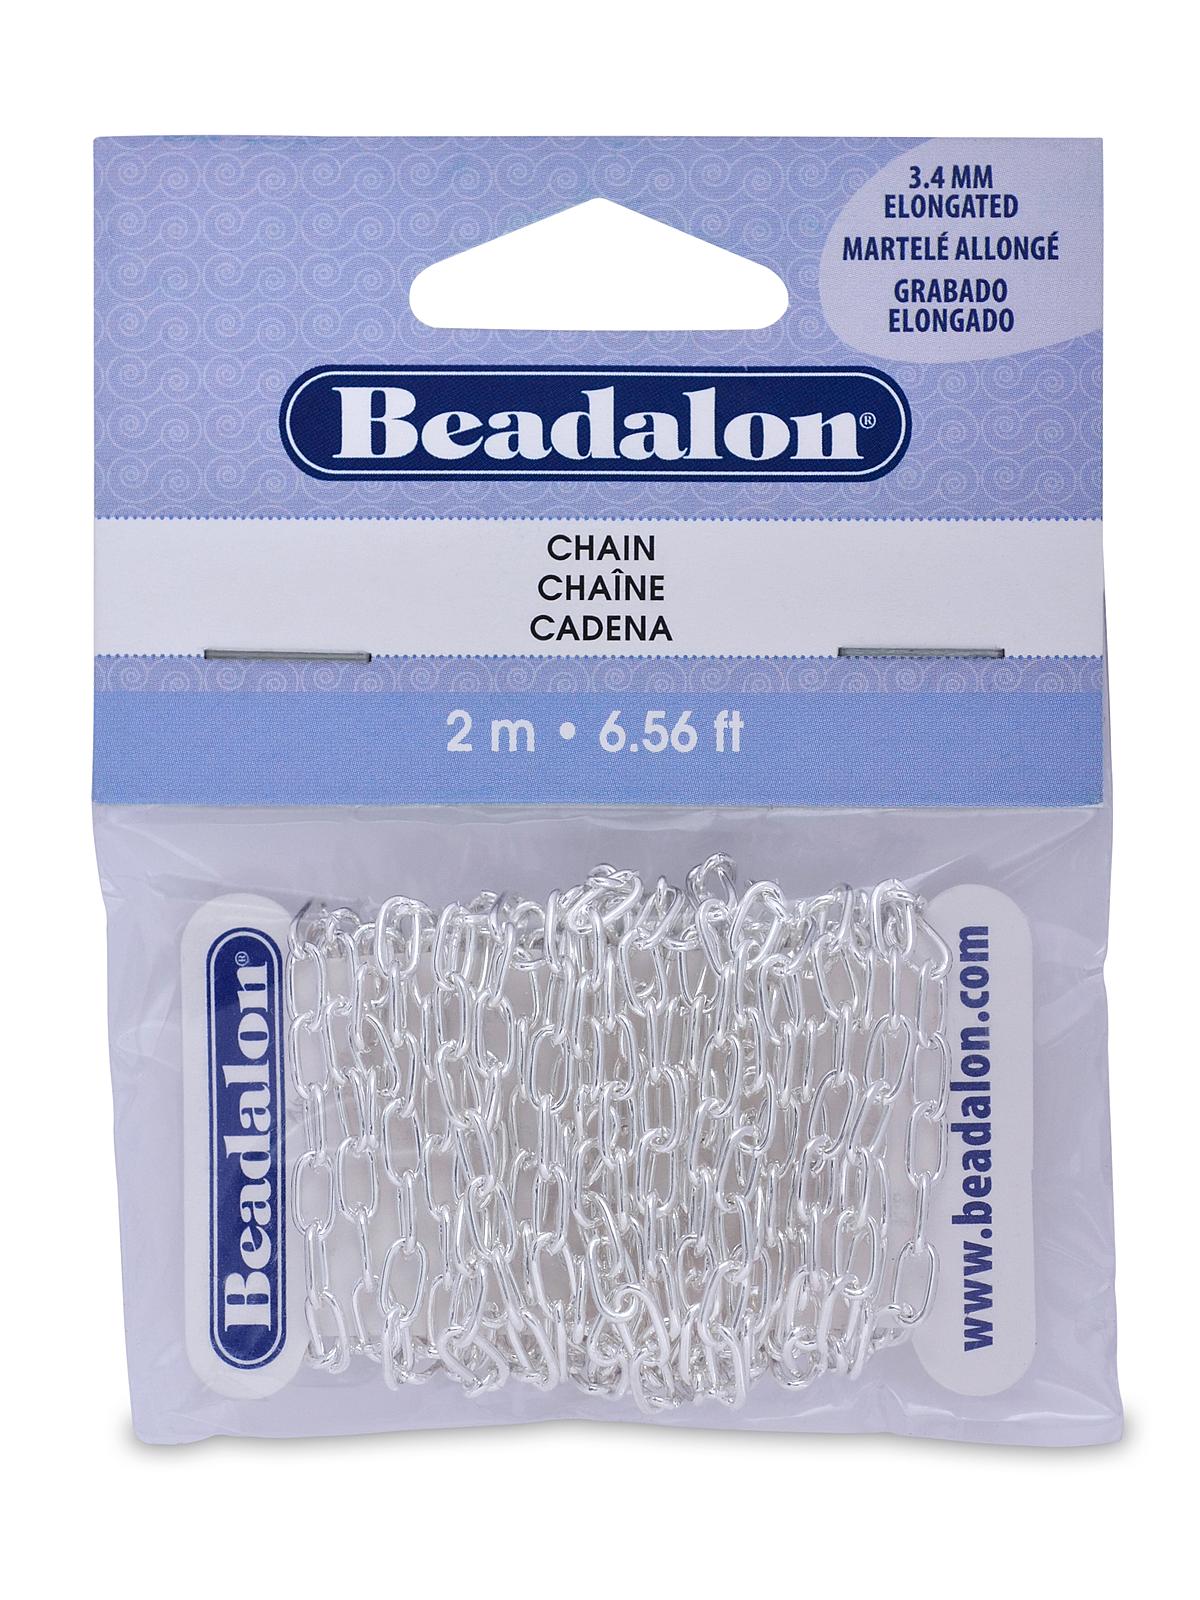 Chains Elongated Cable Silver 6.56 Ft.